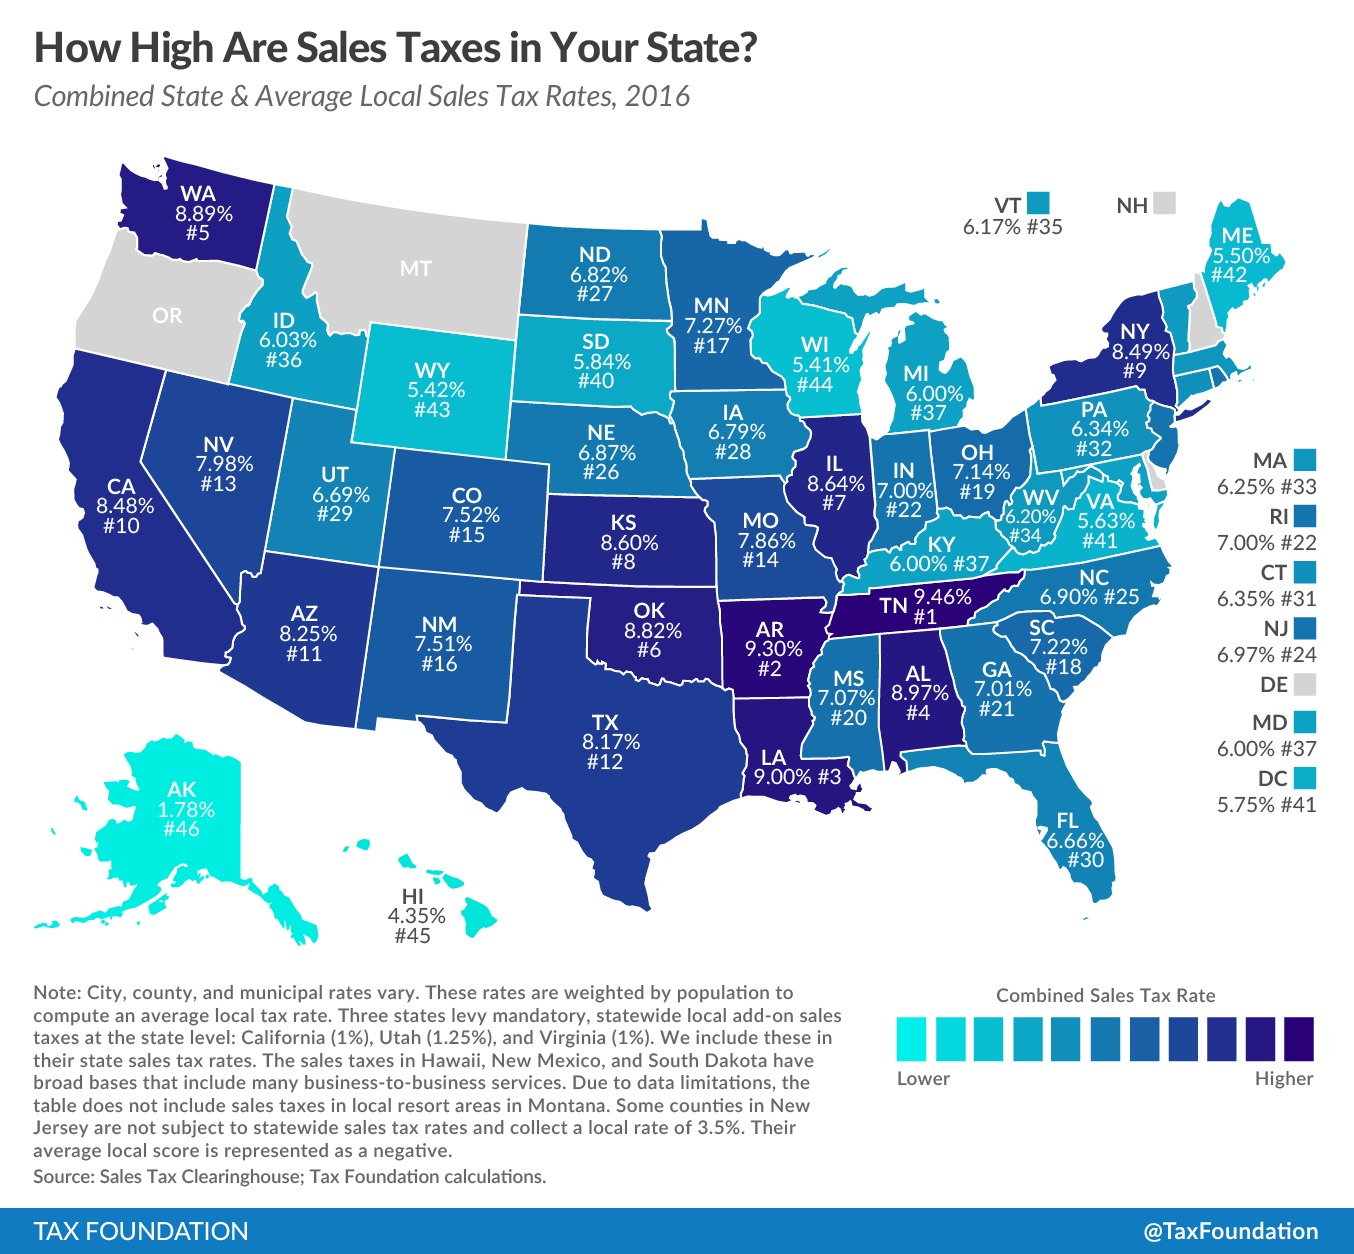 OUCH Alabama has 4th highest combined sales tax rate in the country